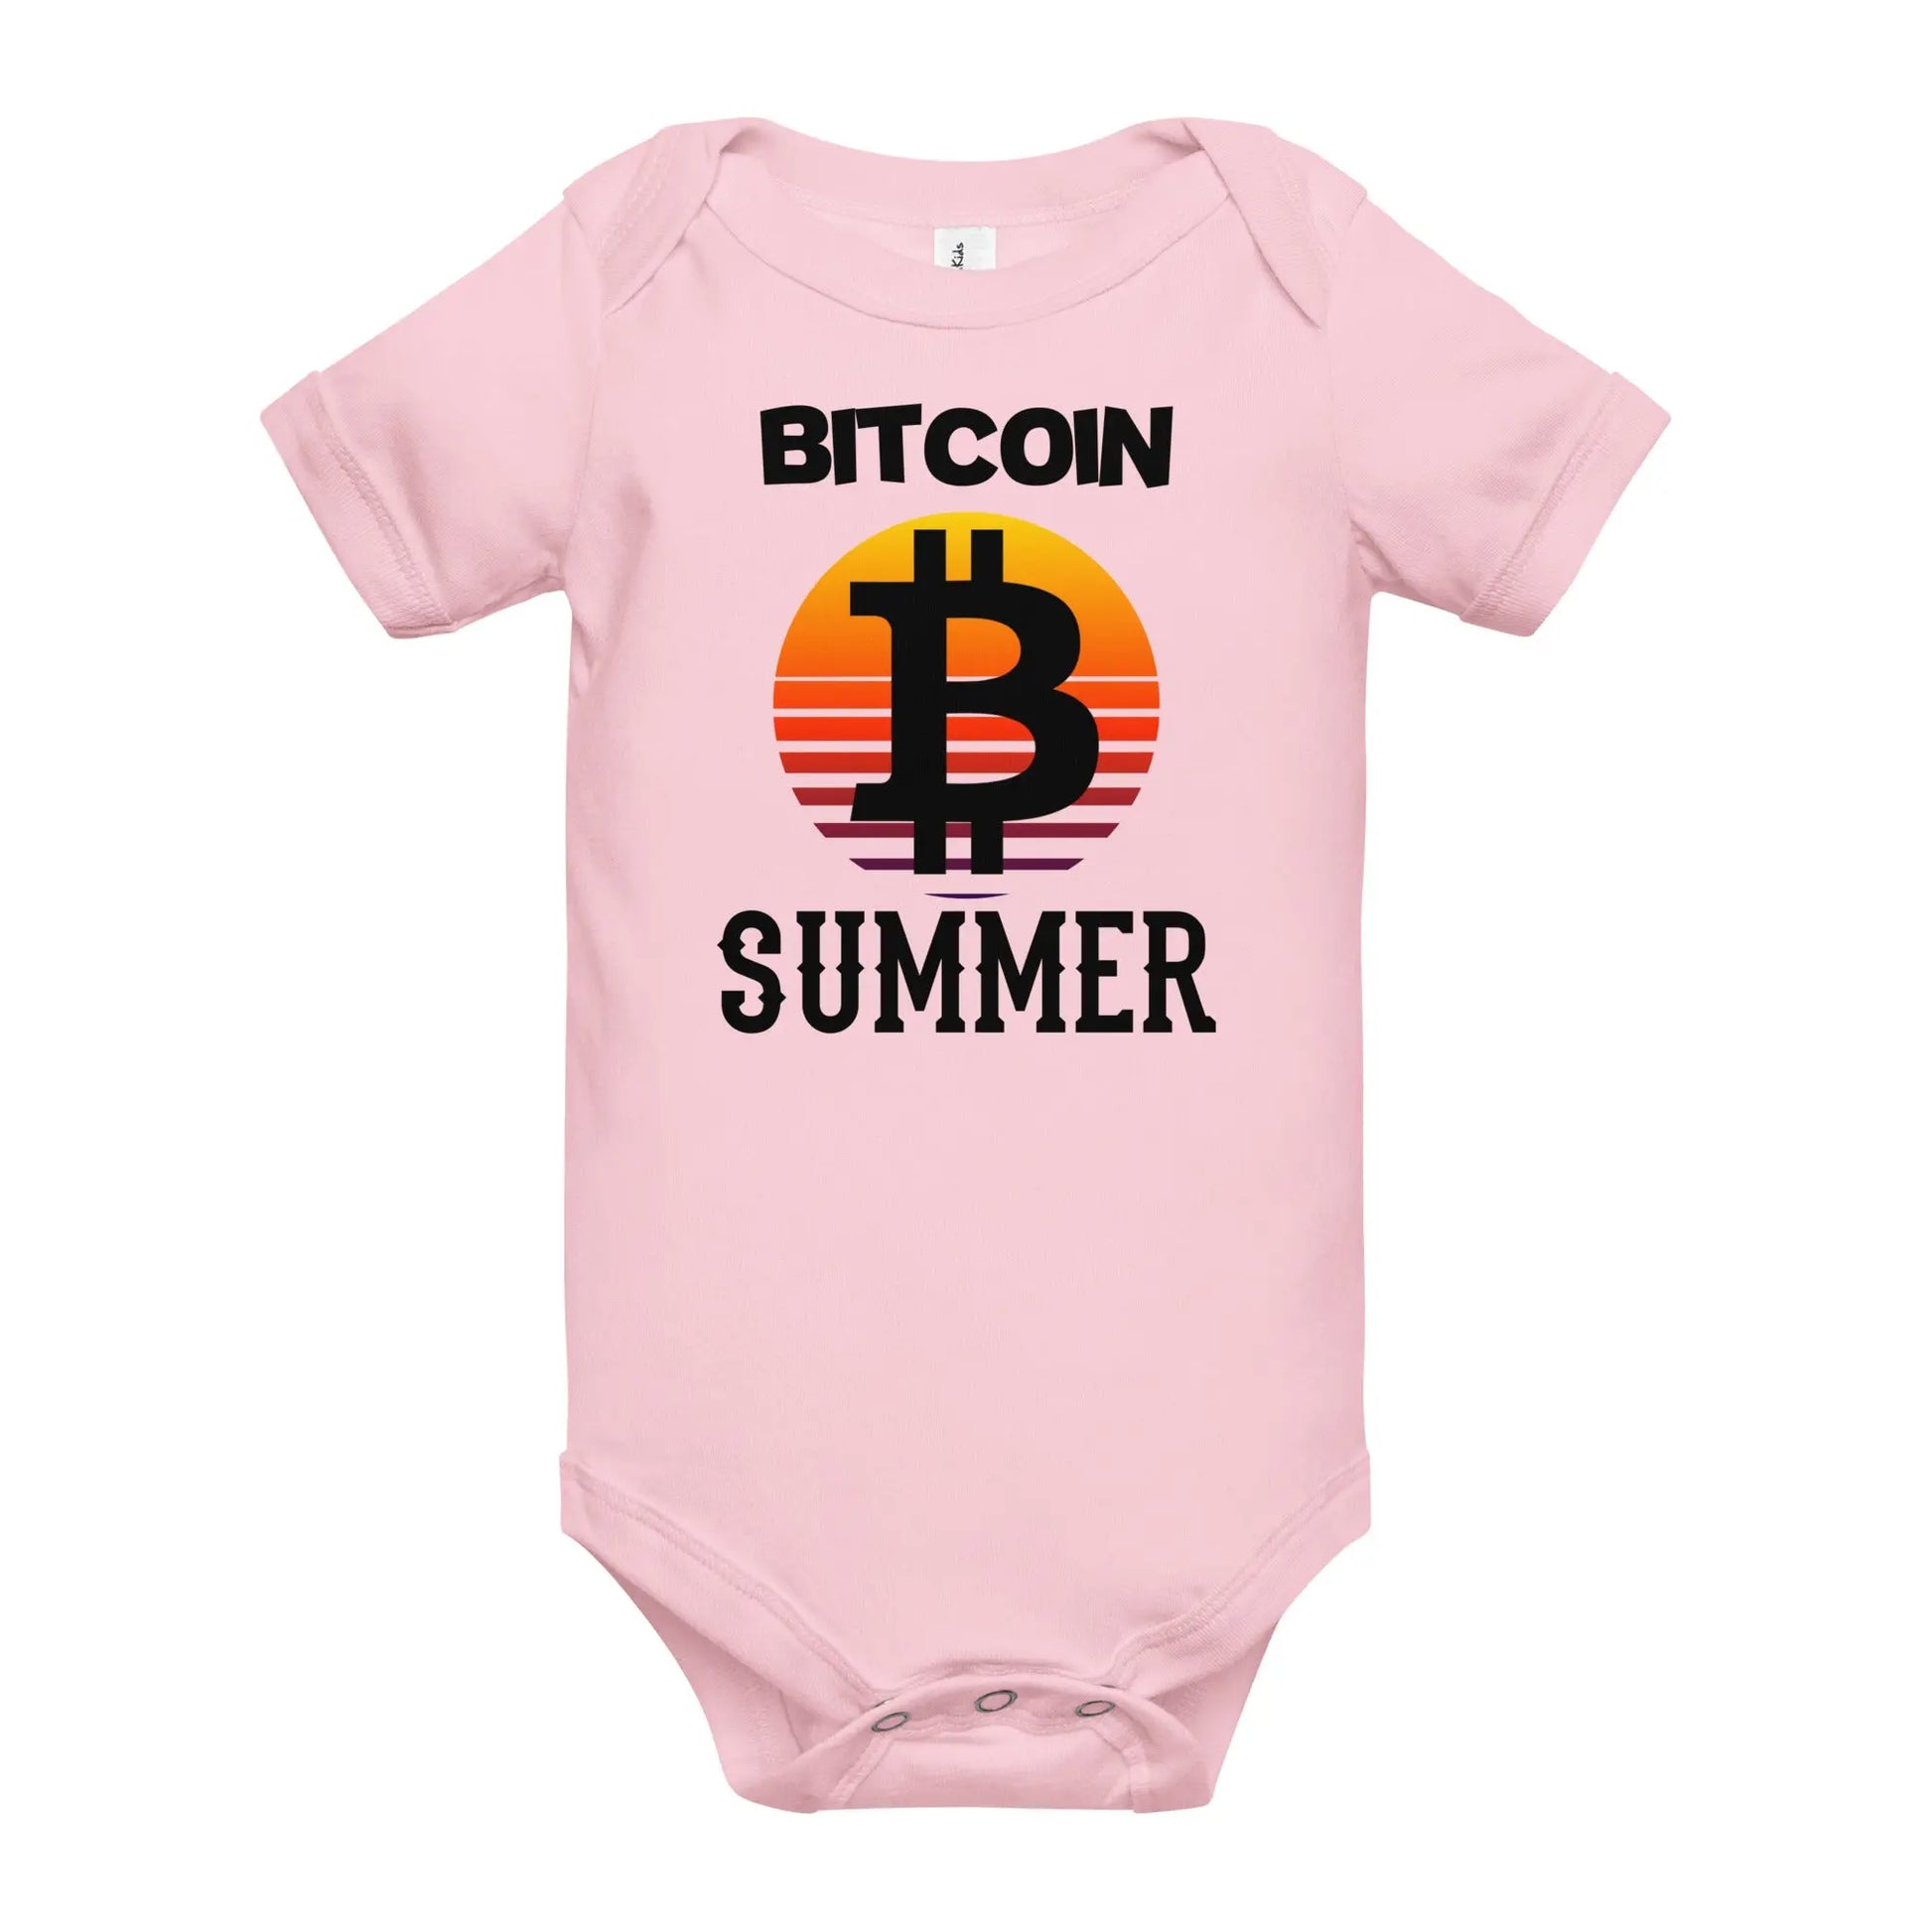 Bitcoin Summer - Baby Bitcoin Body Suit Pink Color